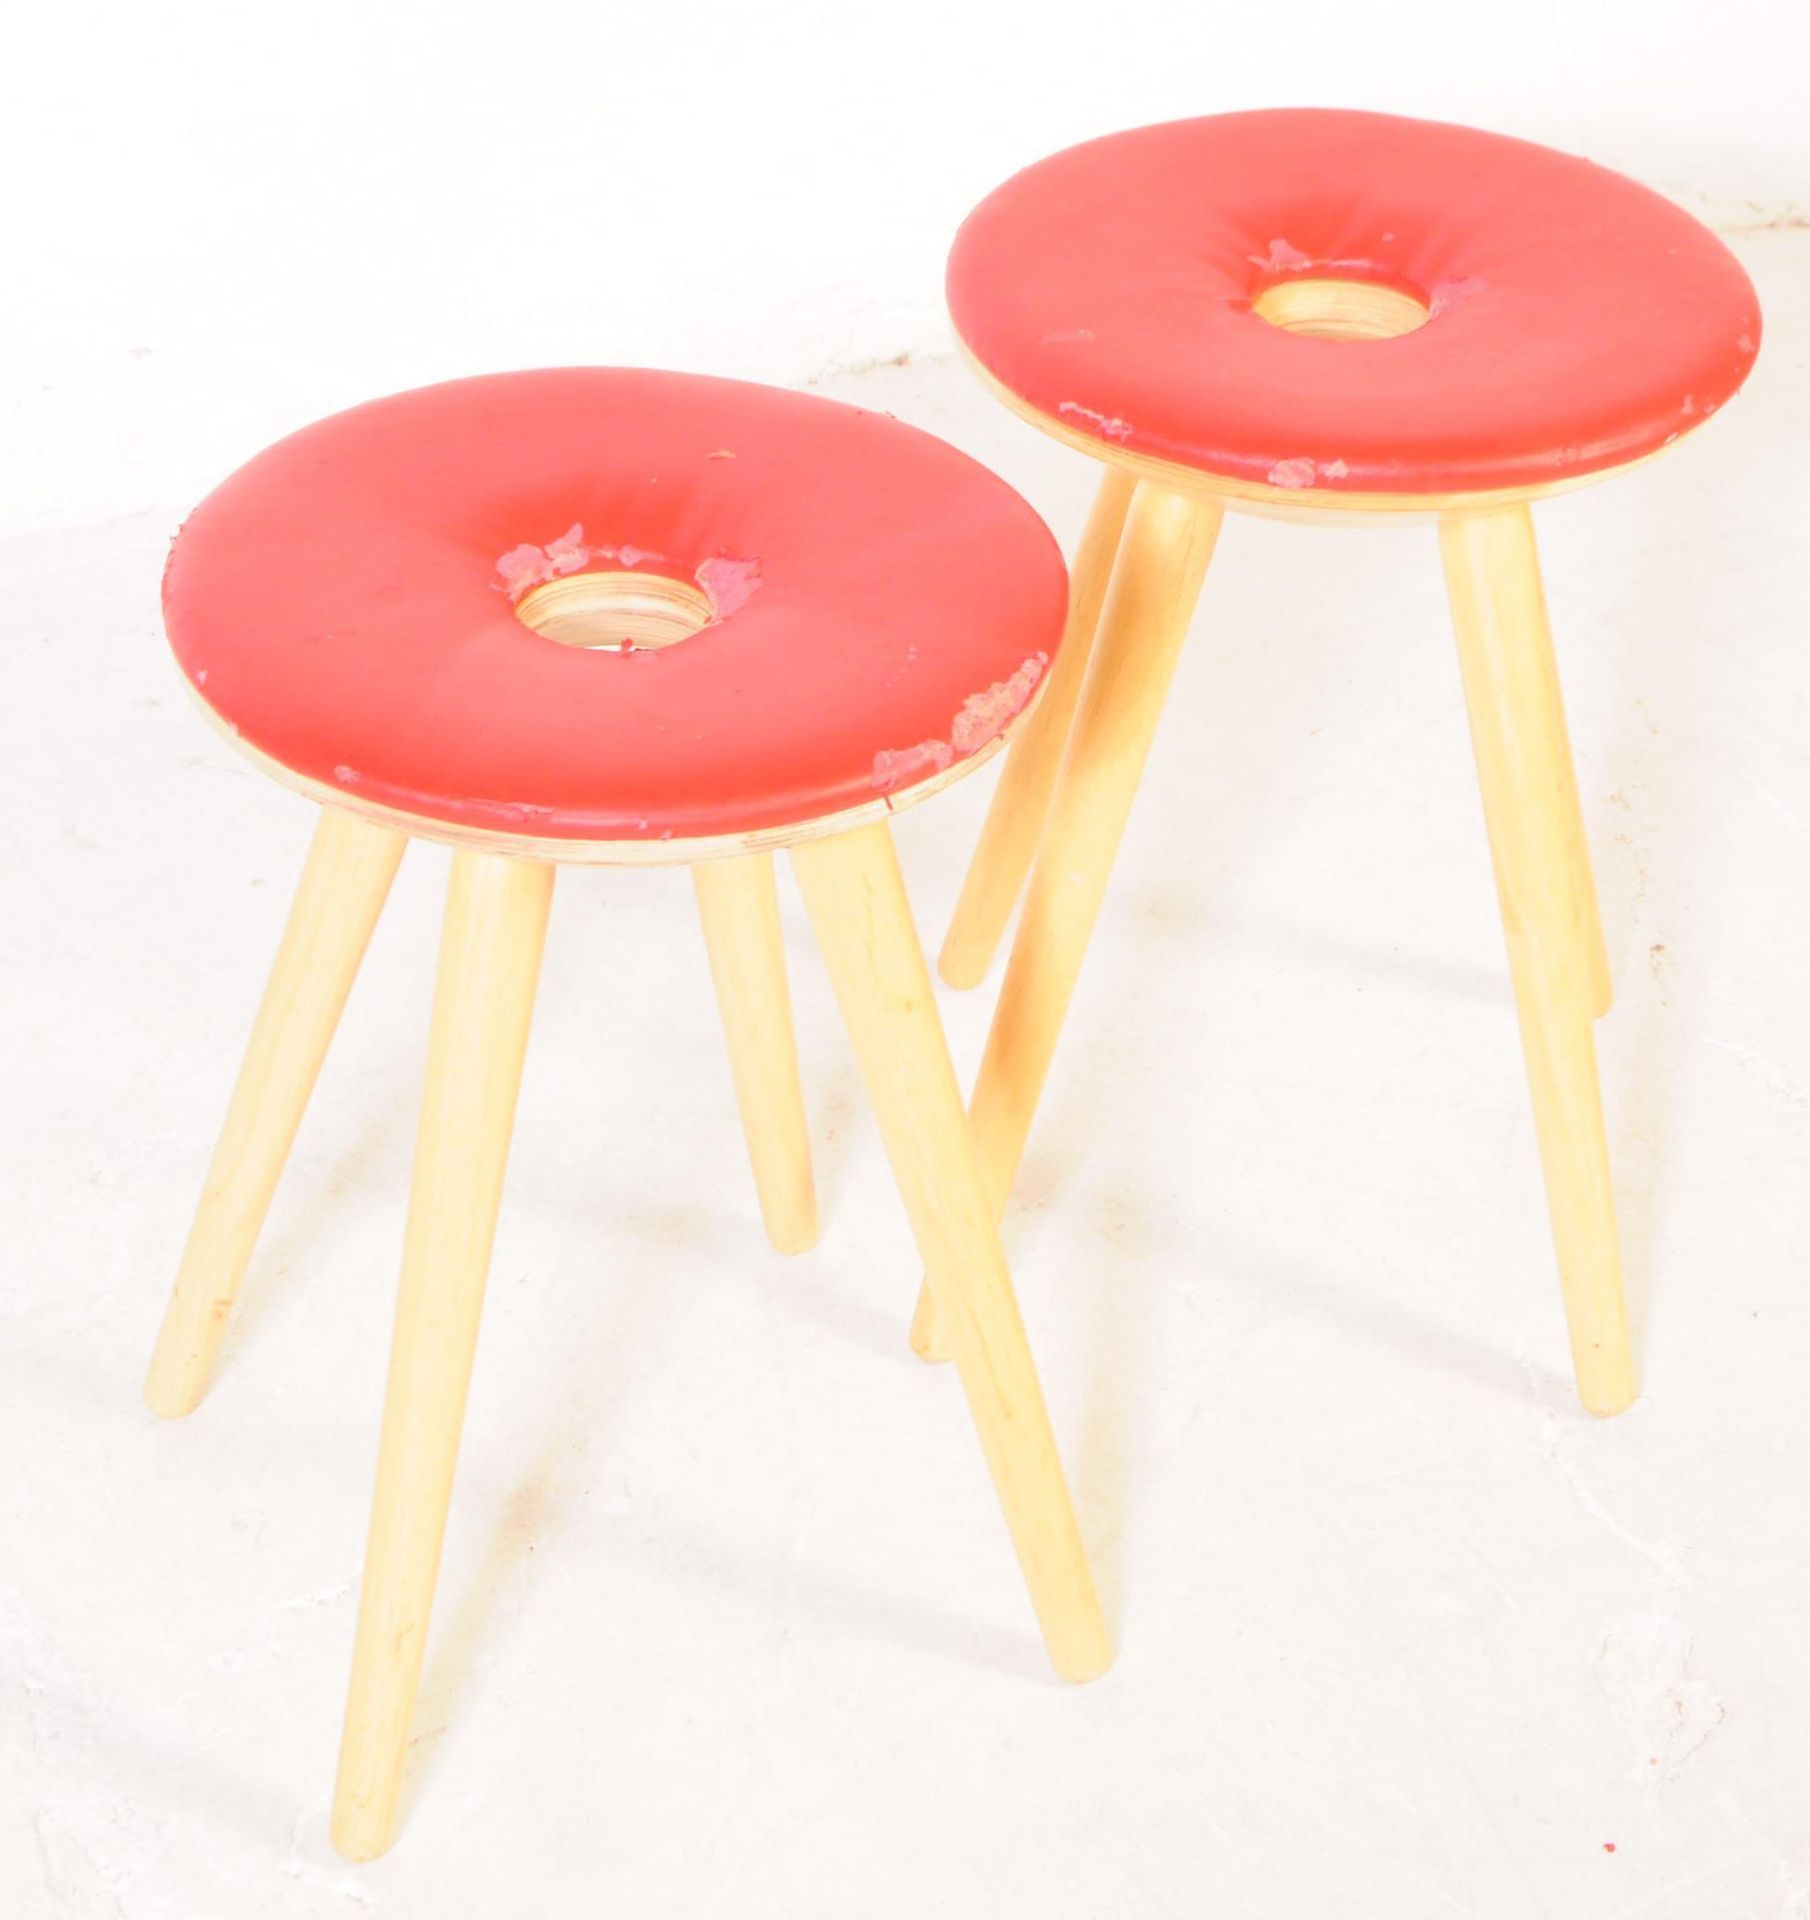 PAIR OF MID CENTURY VINYL TOPPED STOOLS - Image 2 of 6